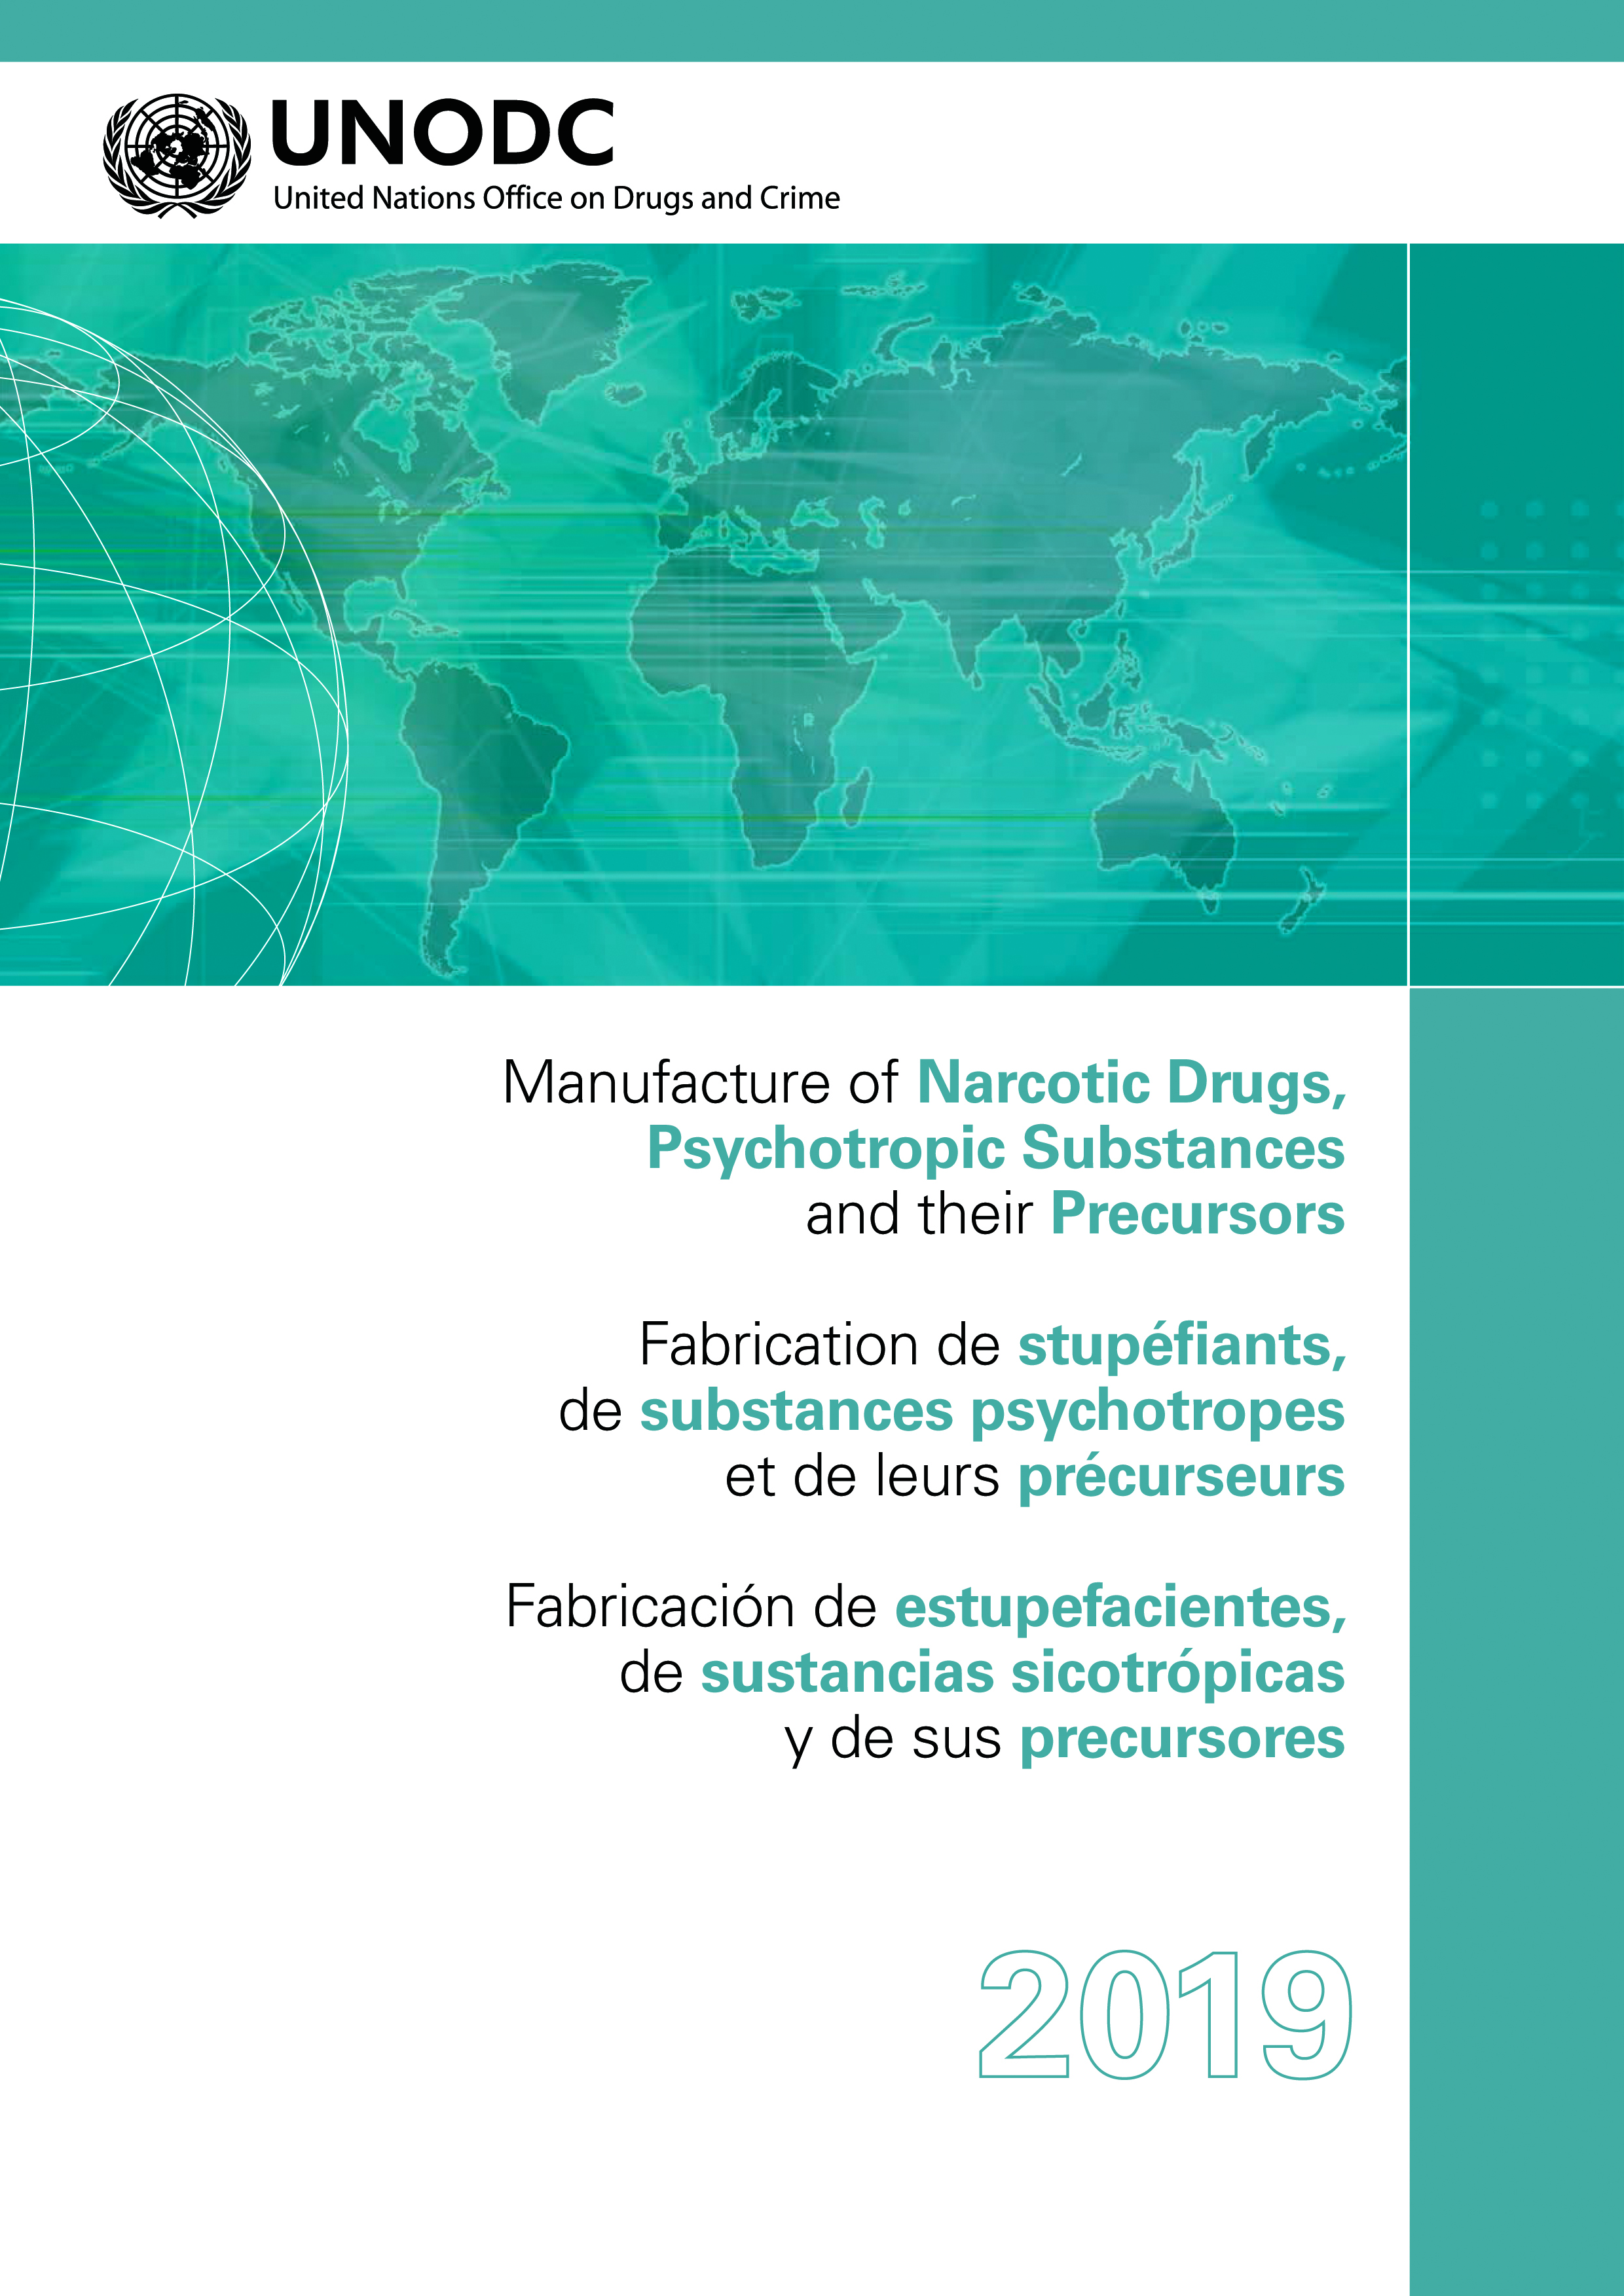 image of Manufacture of Narcotic Drugs, Psychotropic Substances and their Precursors 2019